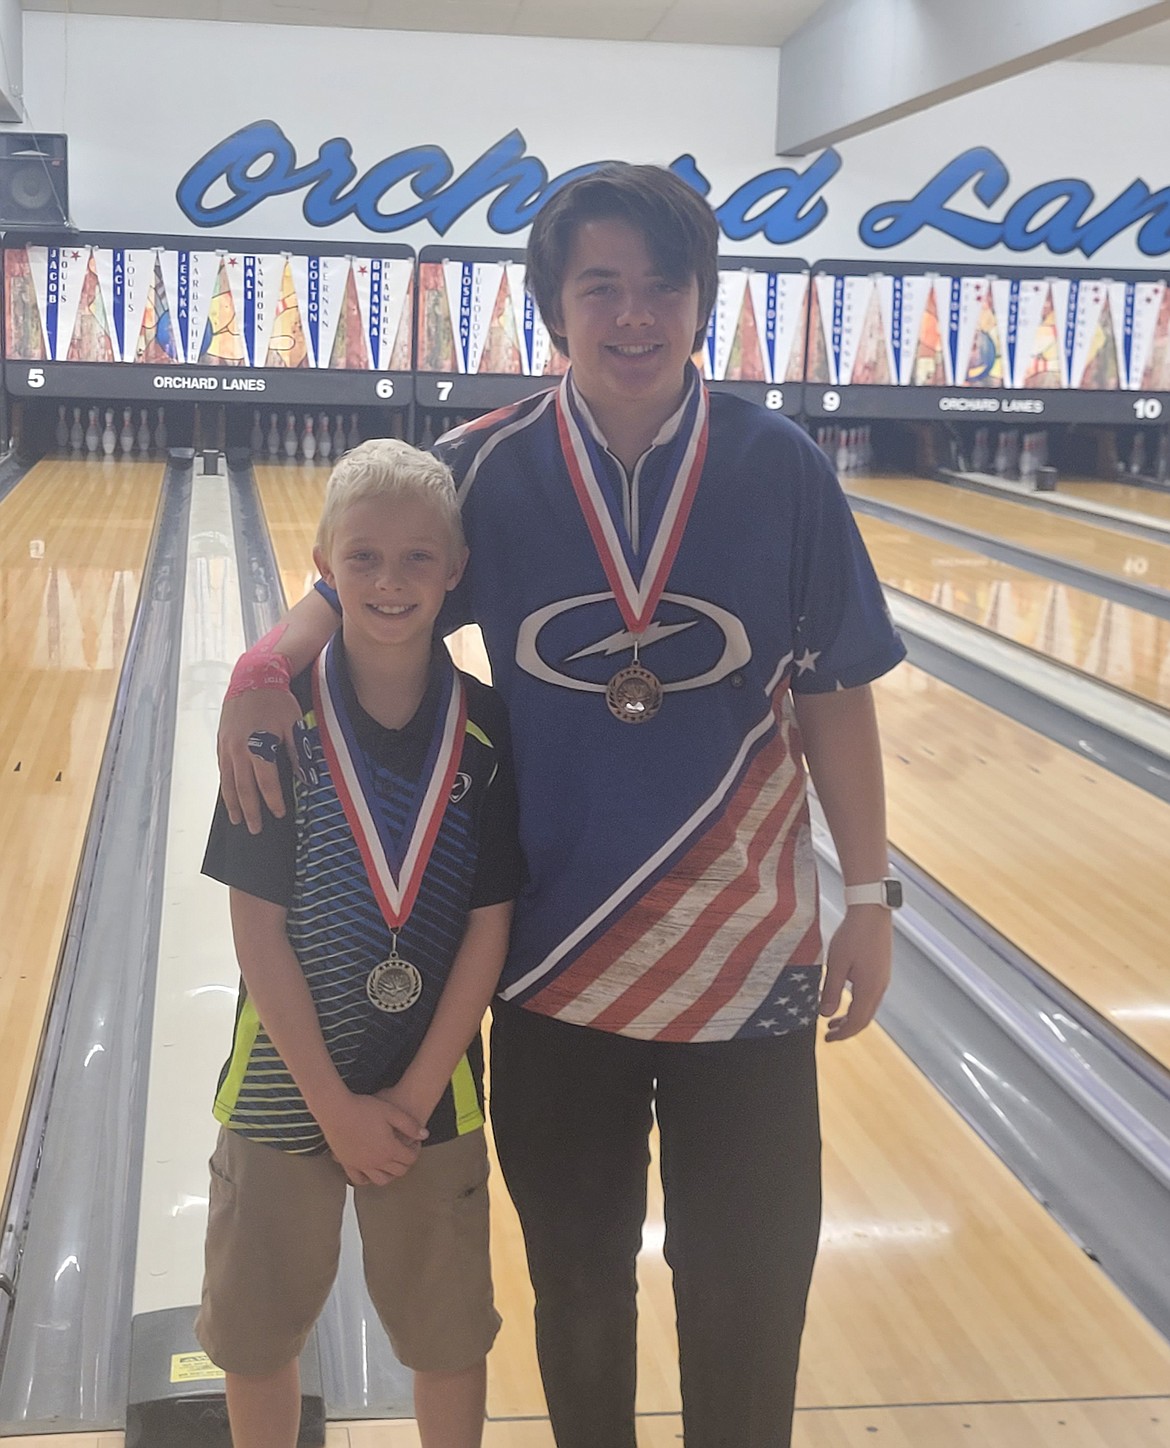 Courtesy photo
Kenton Still, left, of Post Falls and Colin Borgaro of Coeur d’Alene wear their medals from the Idaho Junior Bowlers Tour tournament this past weekend at Orchard Lanes in Lewiston. Kenton finished 2nd in the B Division (149 and under) and Colin finished 3rd in the Classic Division (175 and up).